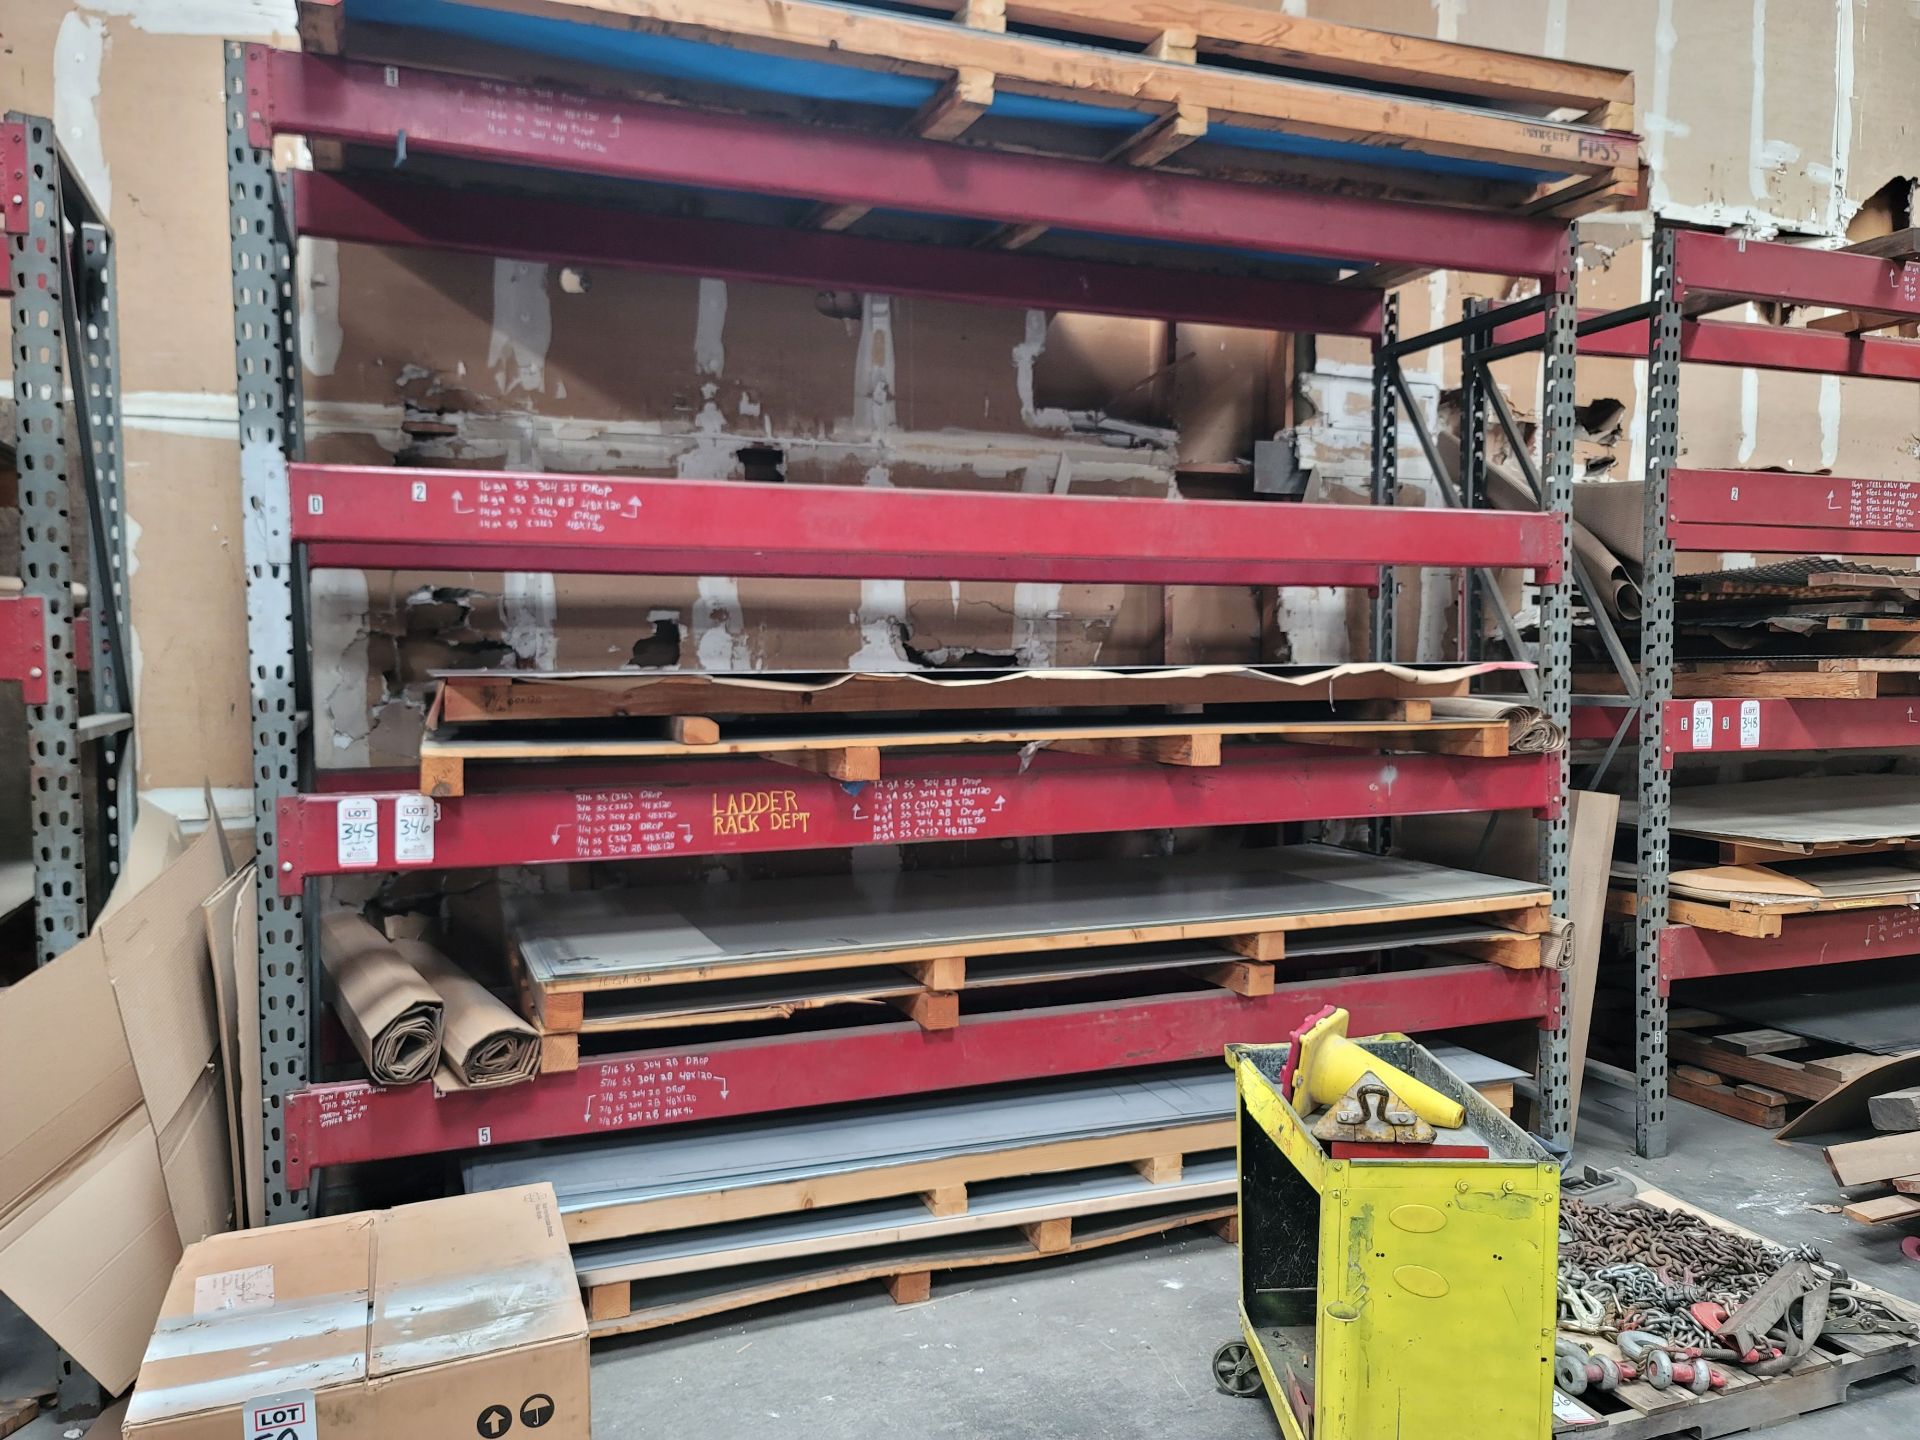 LOT - (1) SECTION OF PALLET RACK, 12' BEAMS, 10' UPRIGHTS, CONTENTS NOT INCLUDED, (DELAYED PICKUP